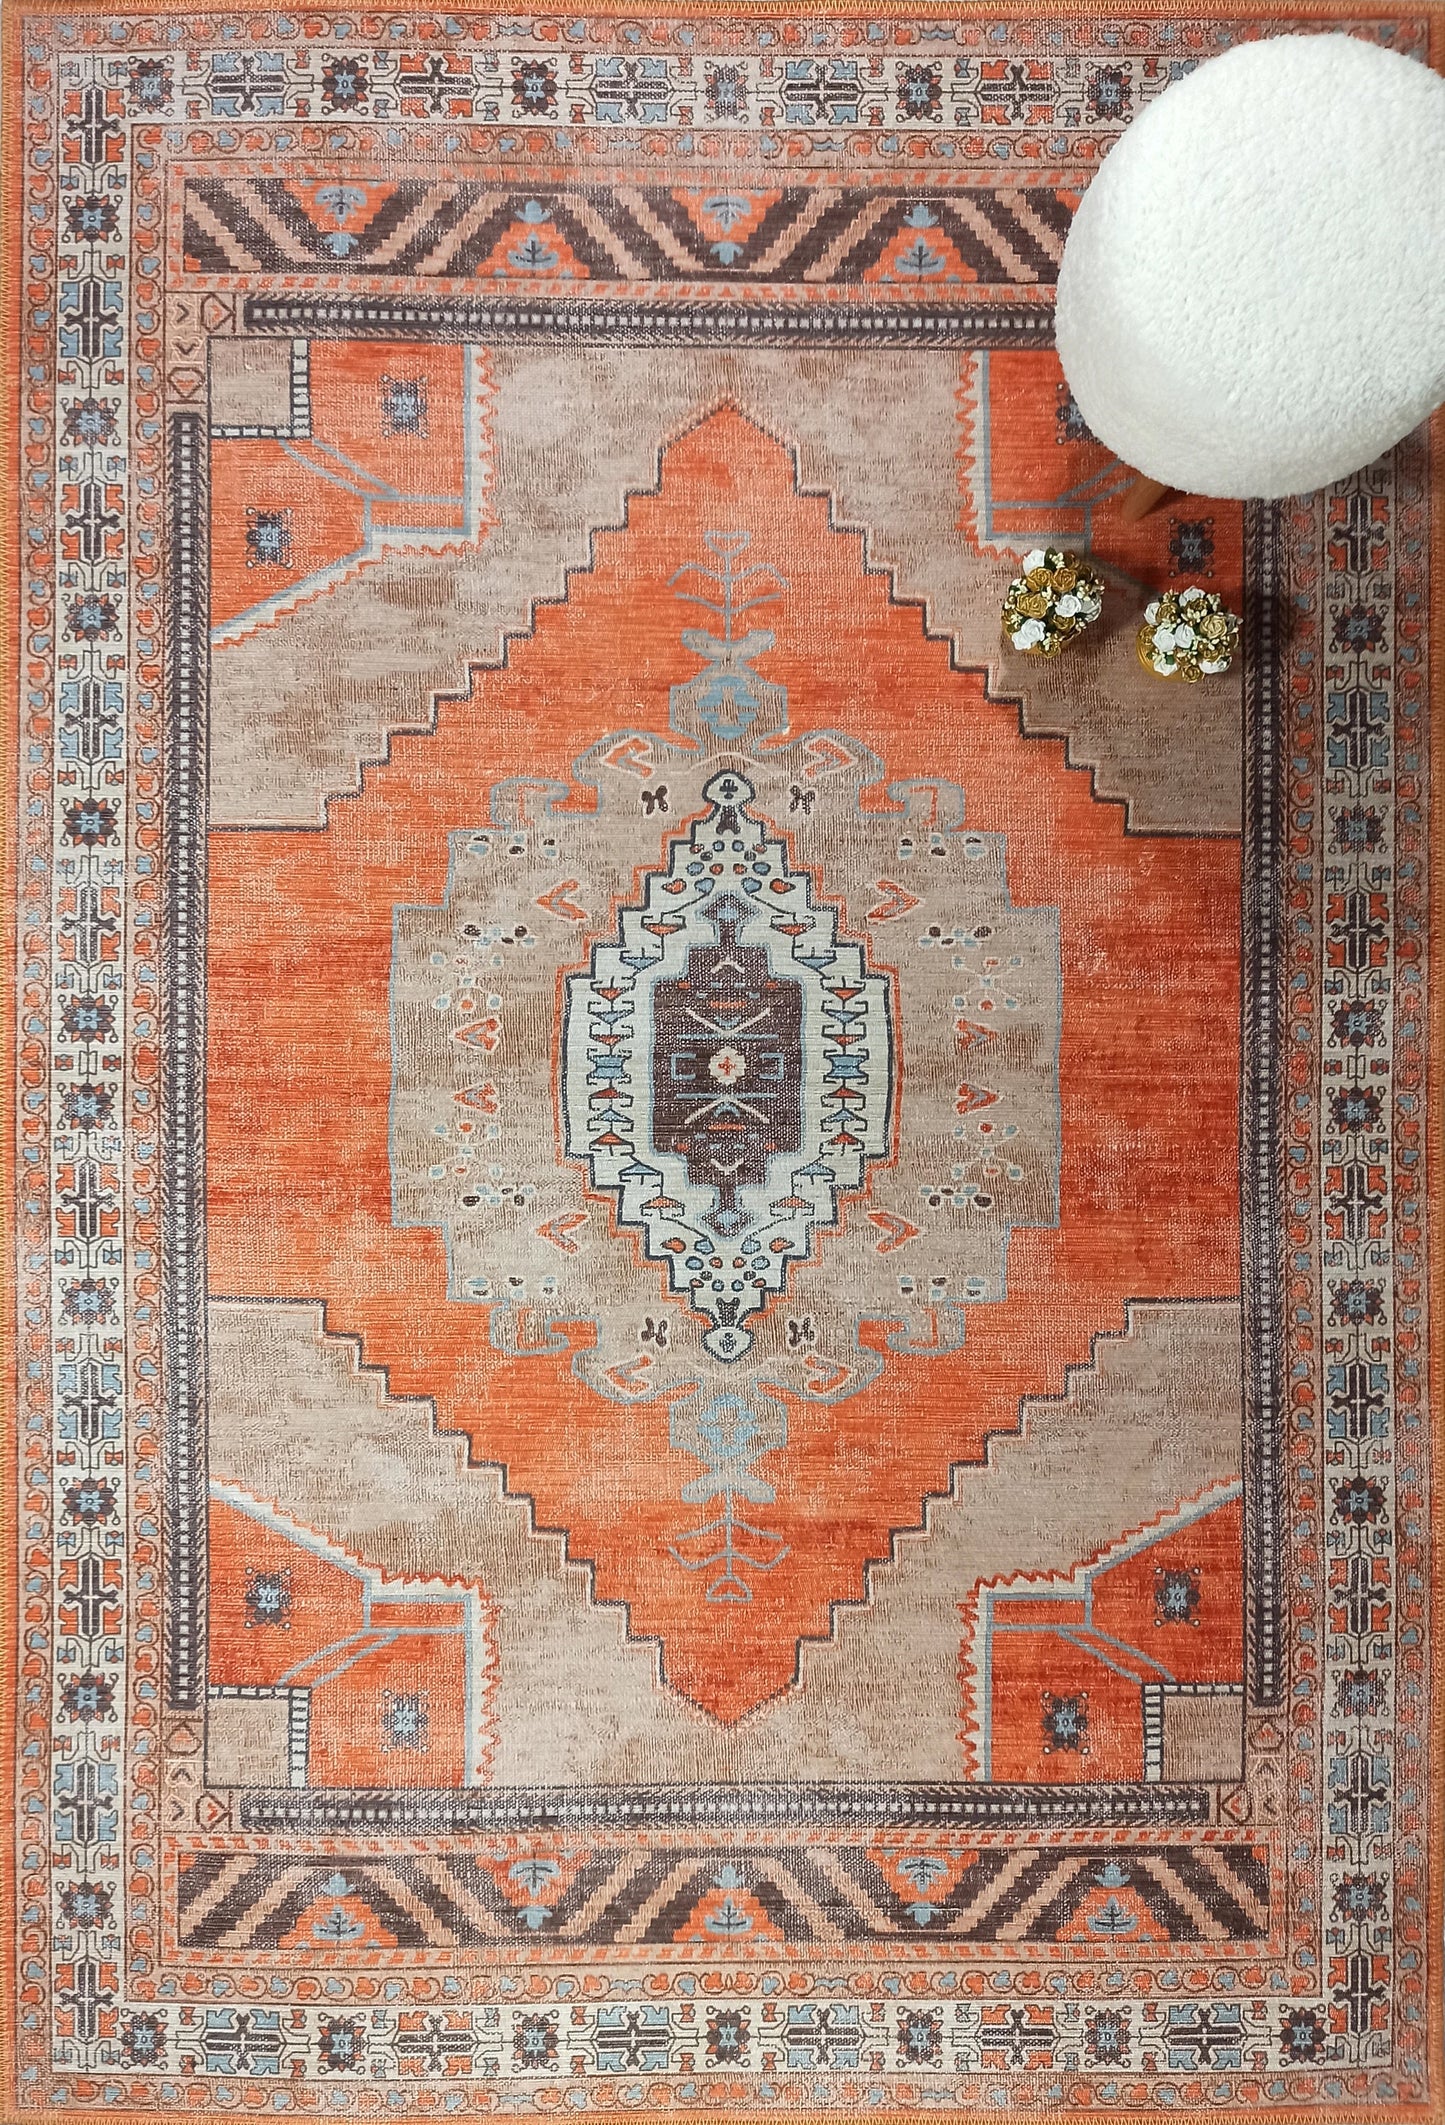 Turkish Vintage Rug, Bold Warm Shades of Orange Boho Eclectic Oriental Geometric Antique Persian Inspired Area Rugs Living room Bedroom Hall